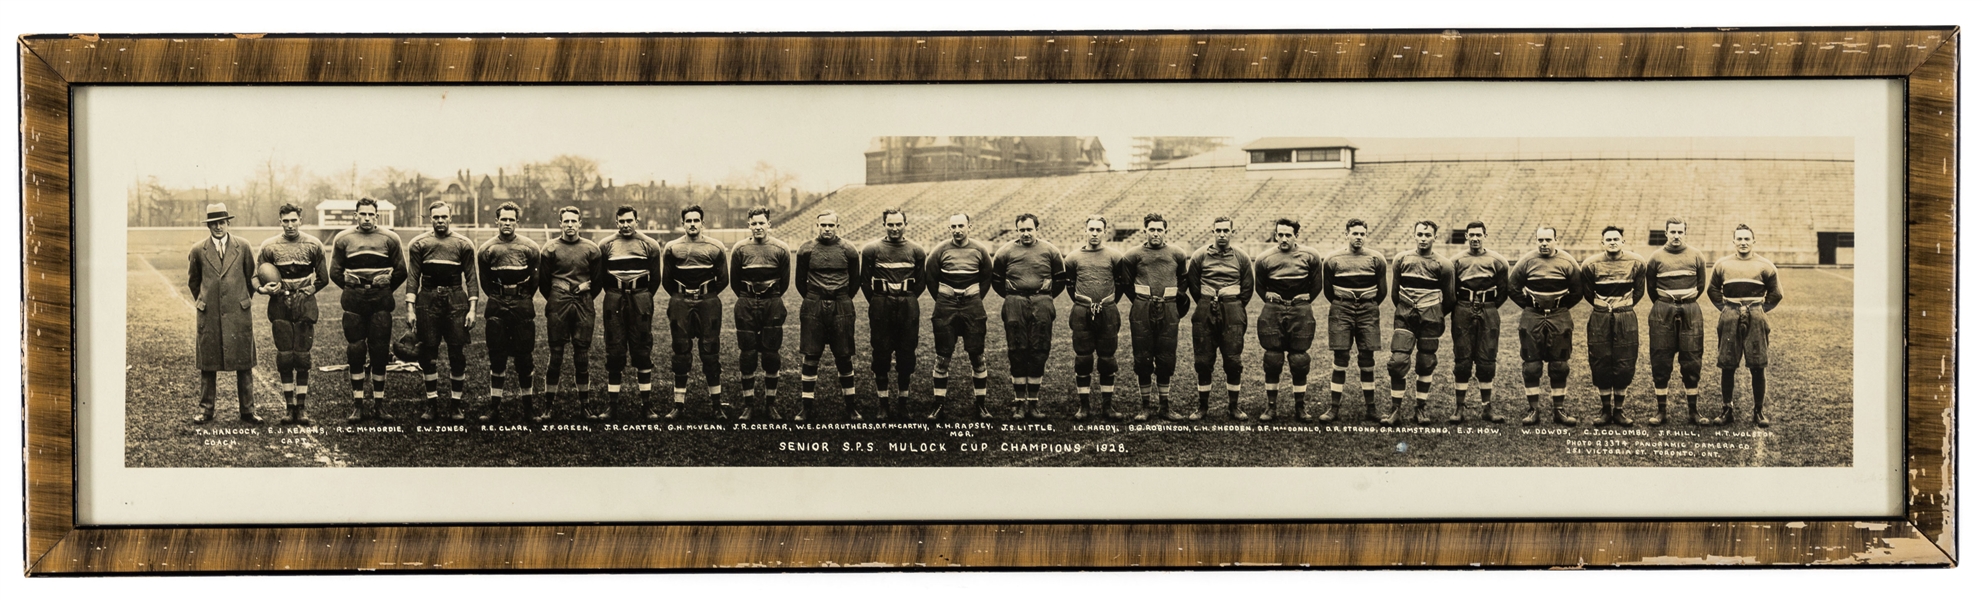 S.P.S. Rugby Football Team 1928 Mulock Cup Champions and Varsity ORFU 1929 Framed Panoramic Team Photos 